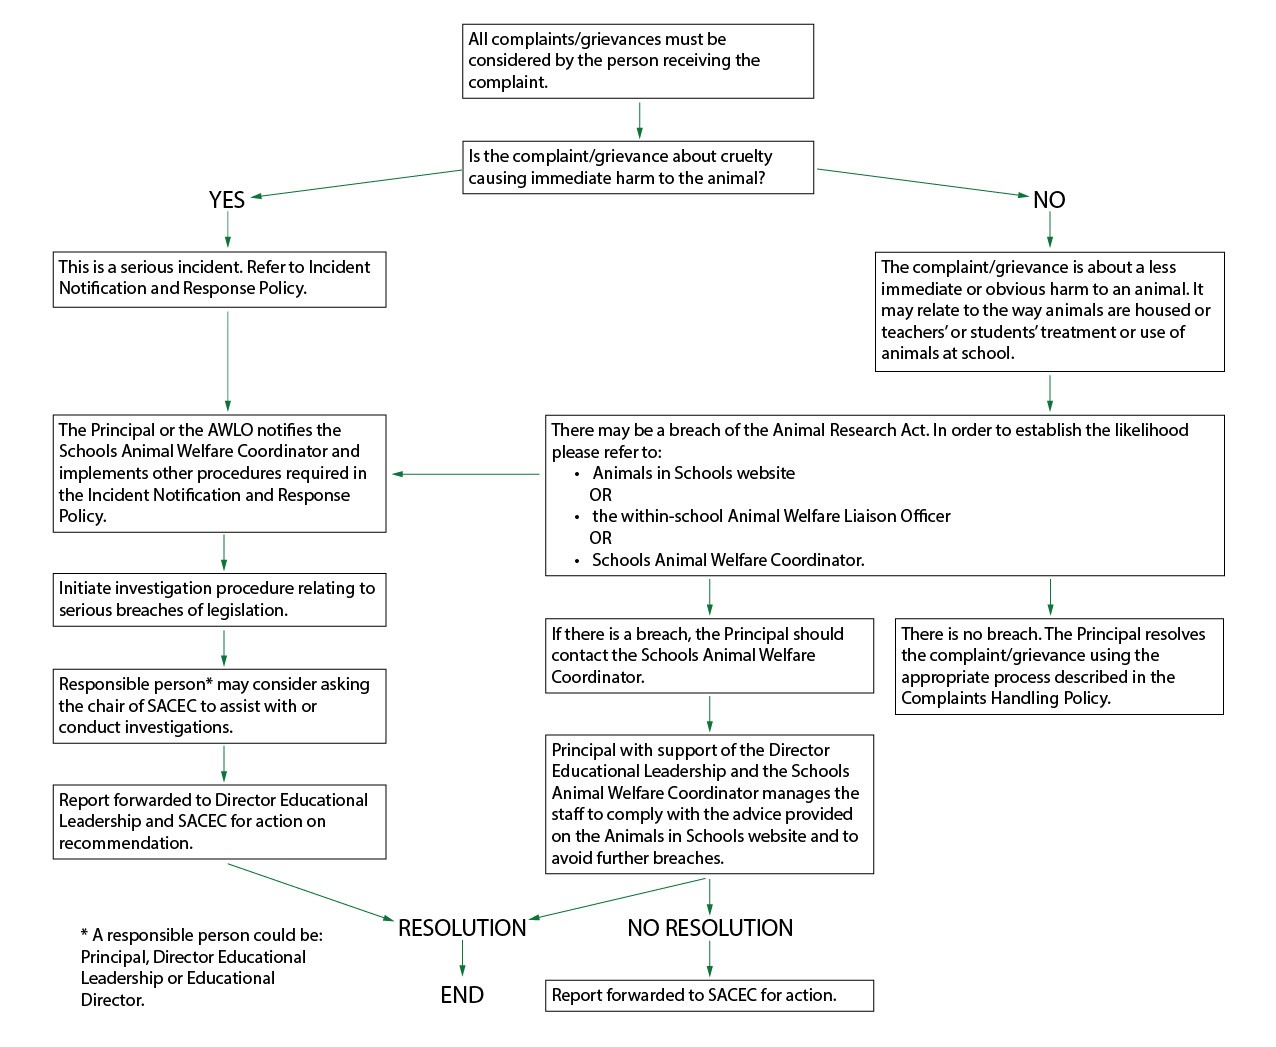 flowchart showing steps in the resolution of complaints and grievances